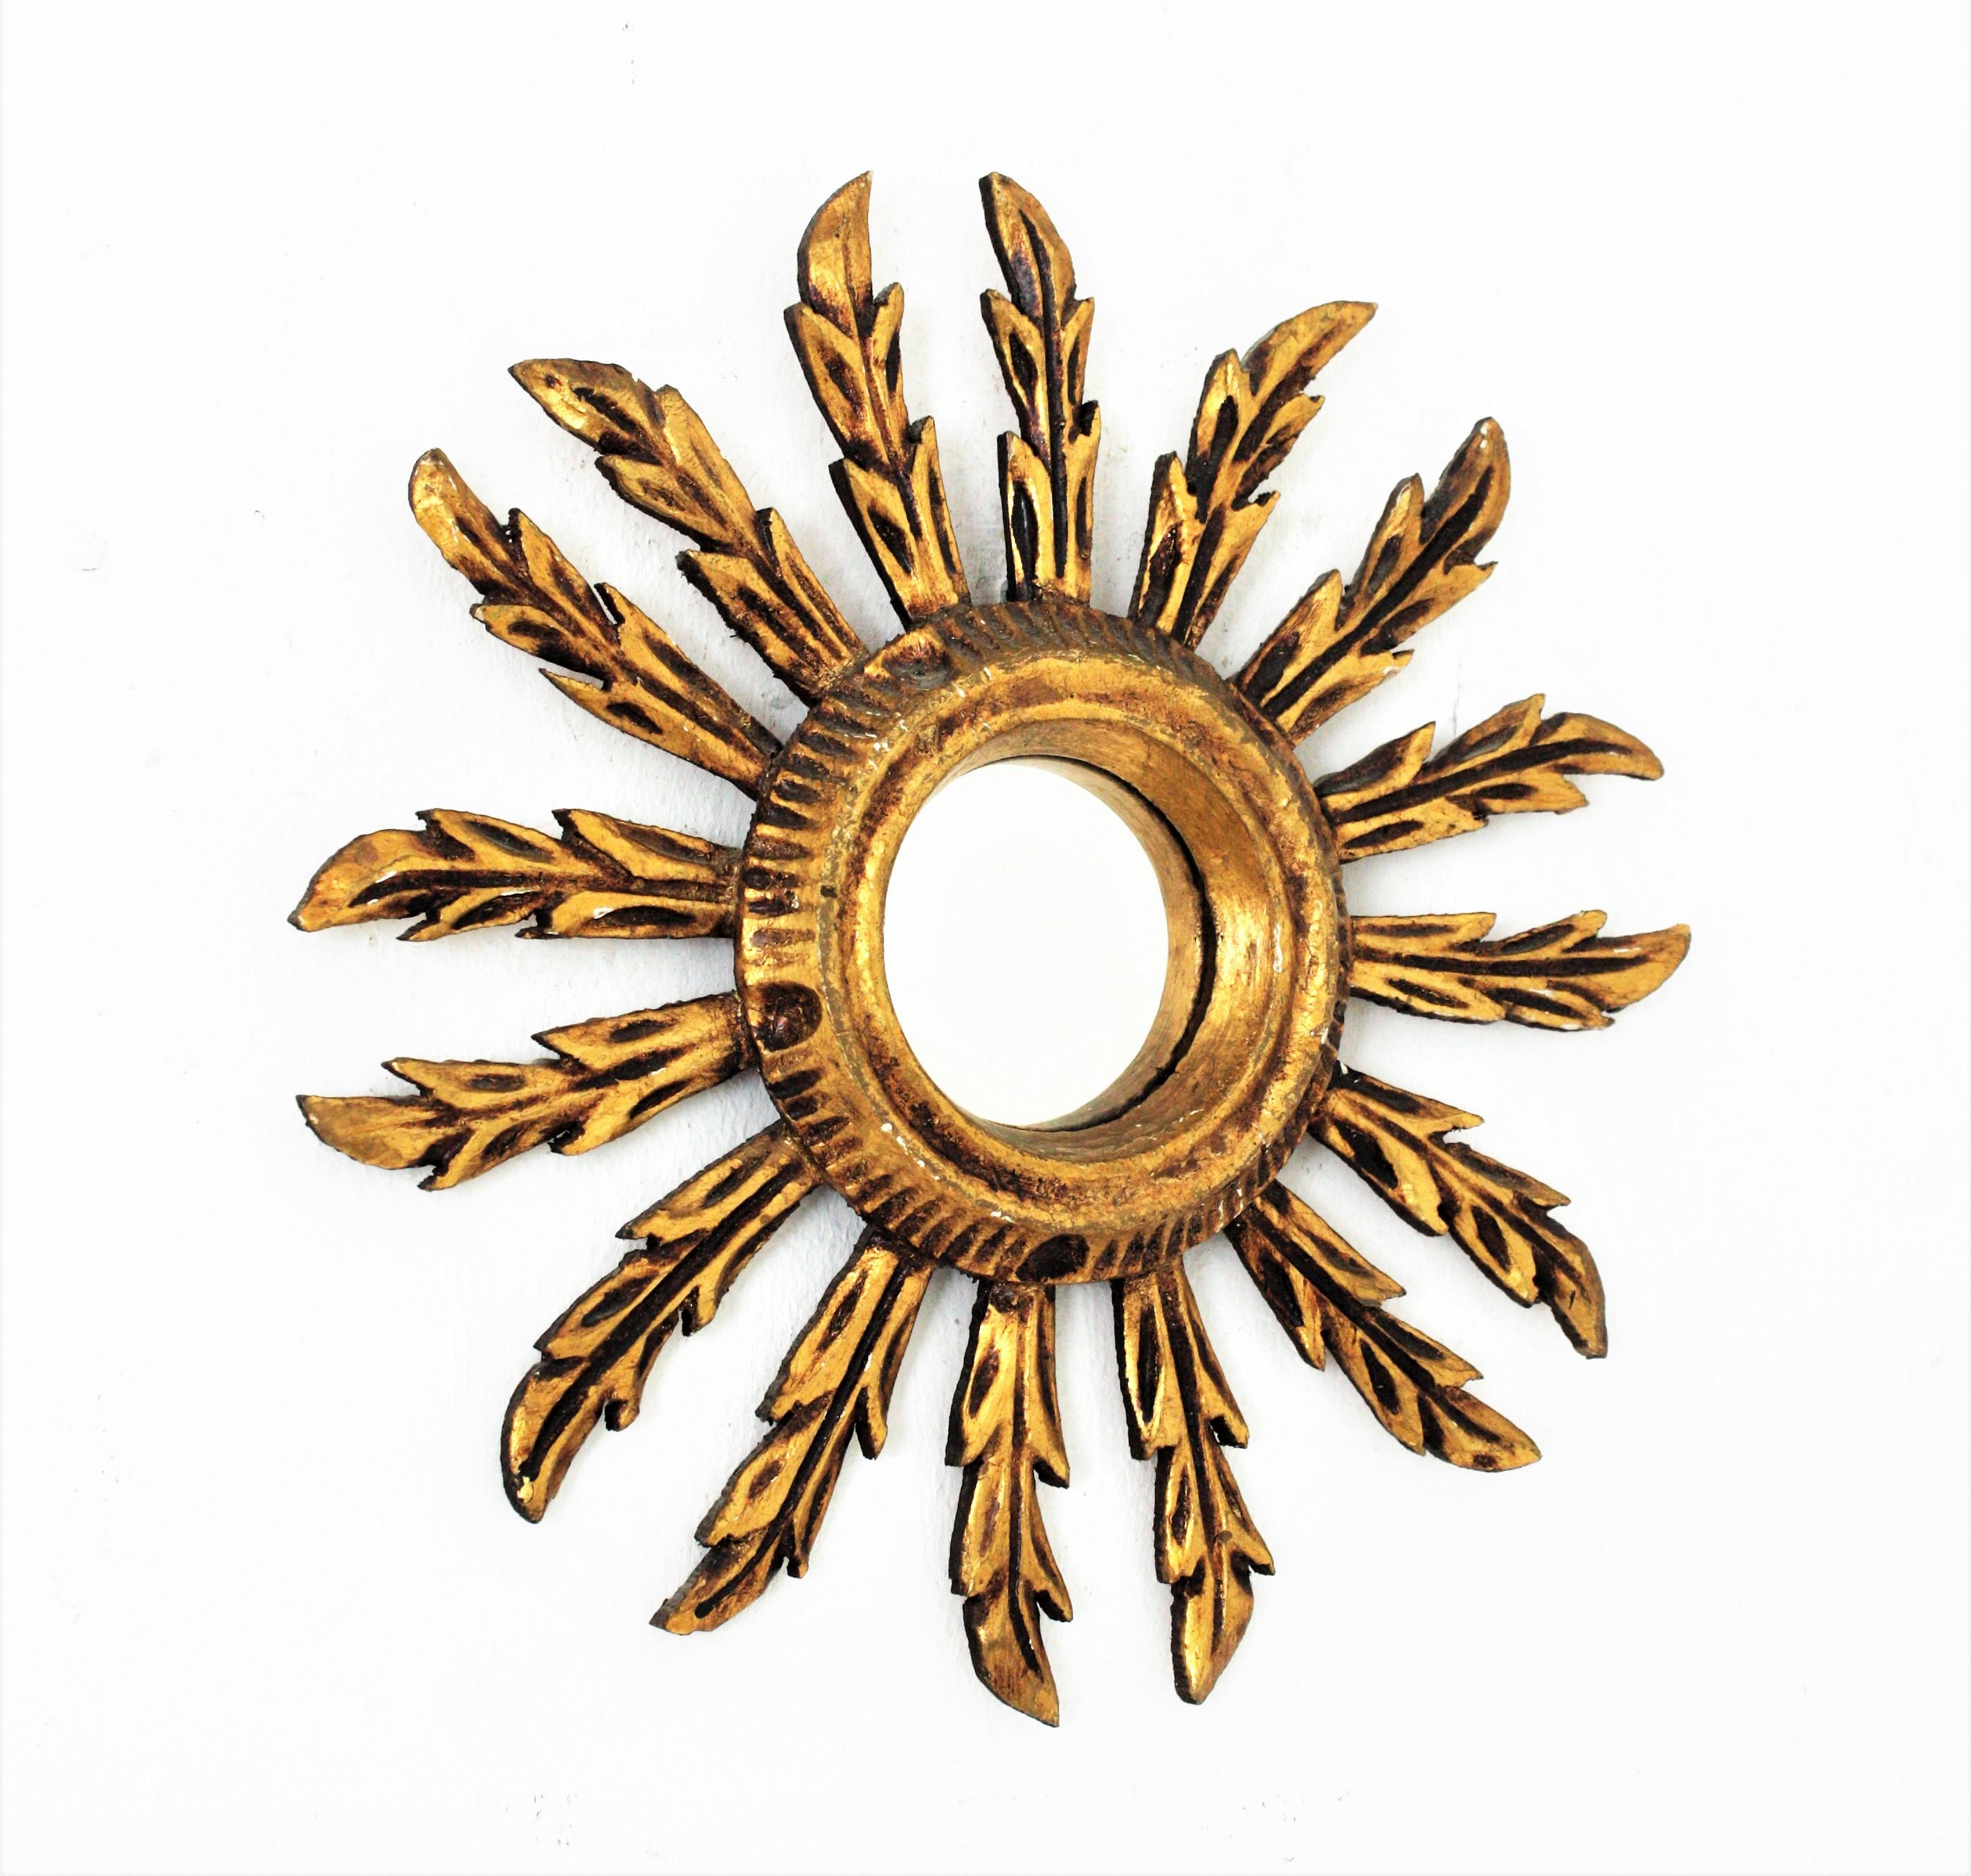 Early 20th century carved giltwood mini sized sunburst mirror in Baroque style.
Beautiful giltwood sunburst mirror in this unusual mini size.
Carved wood covered with gesso and gold leaf finish. Terrific aged patina.
To be placed alone or as a